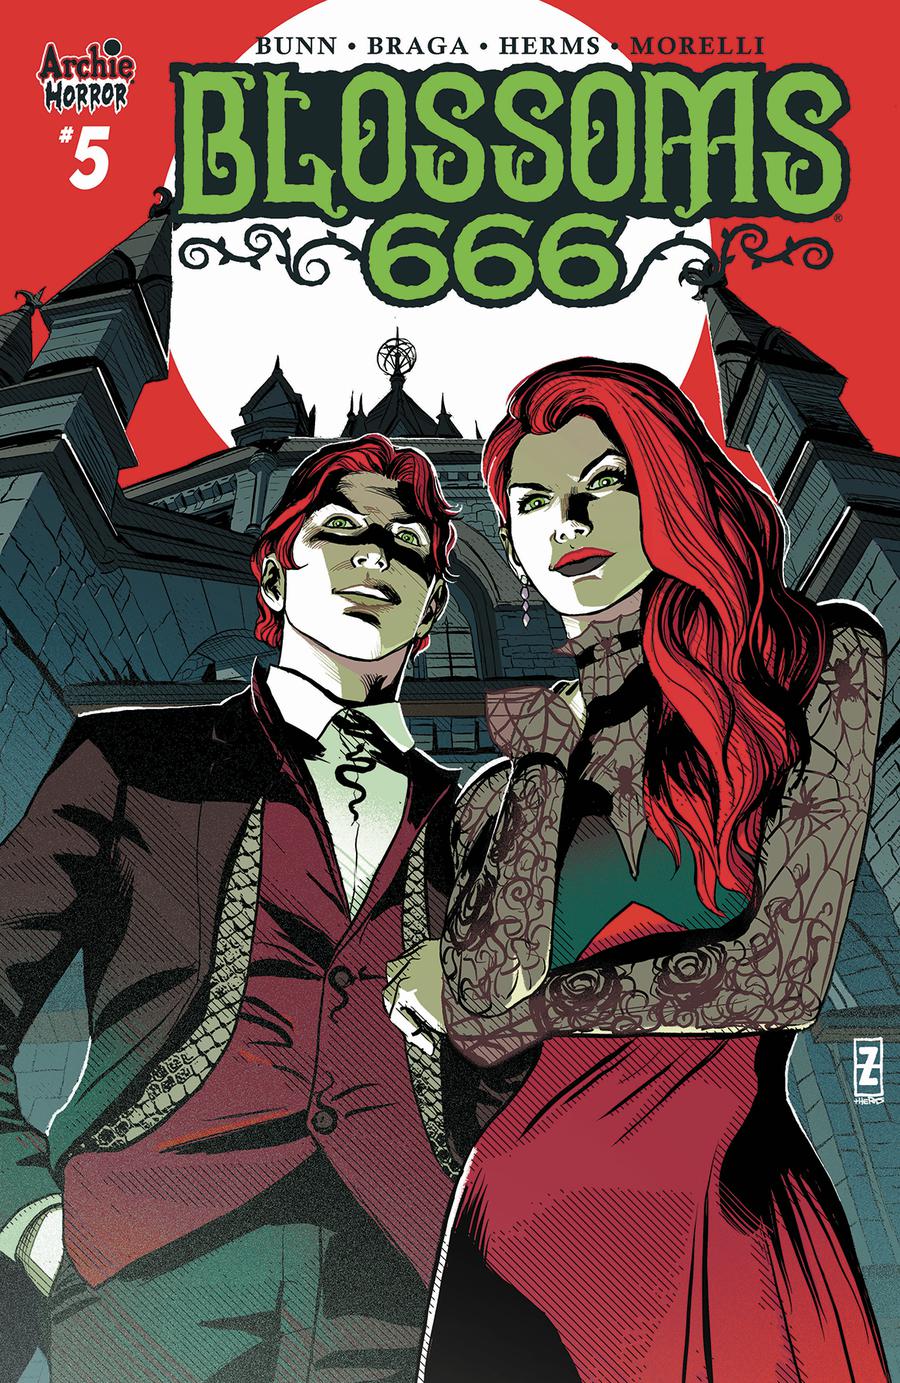 Blossoms 666 #5 Cover C Variant Patrick Zircher & Kelly Fitzpatrick Cover